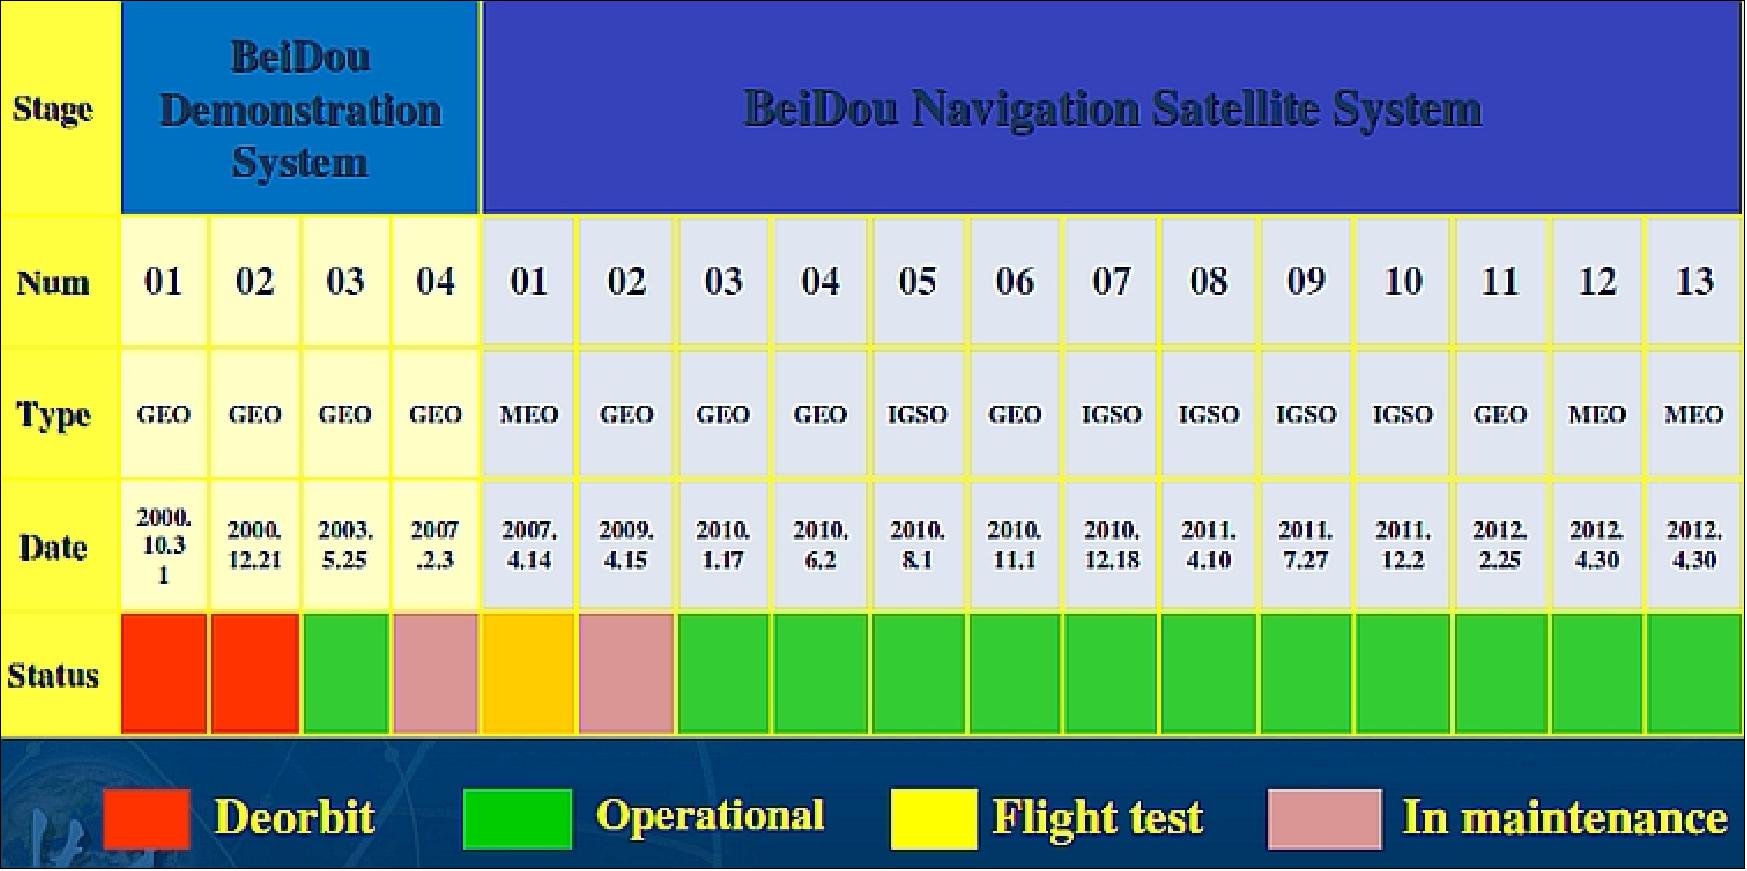 Figure 11: Operational status of the BeiDou system in the summer of 2012 (image credit: CSNO, Ref. 63)